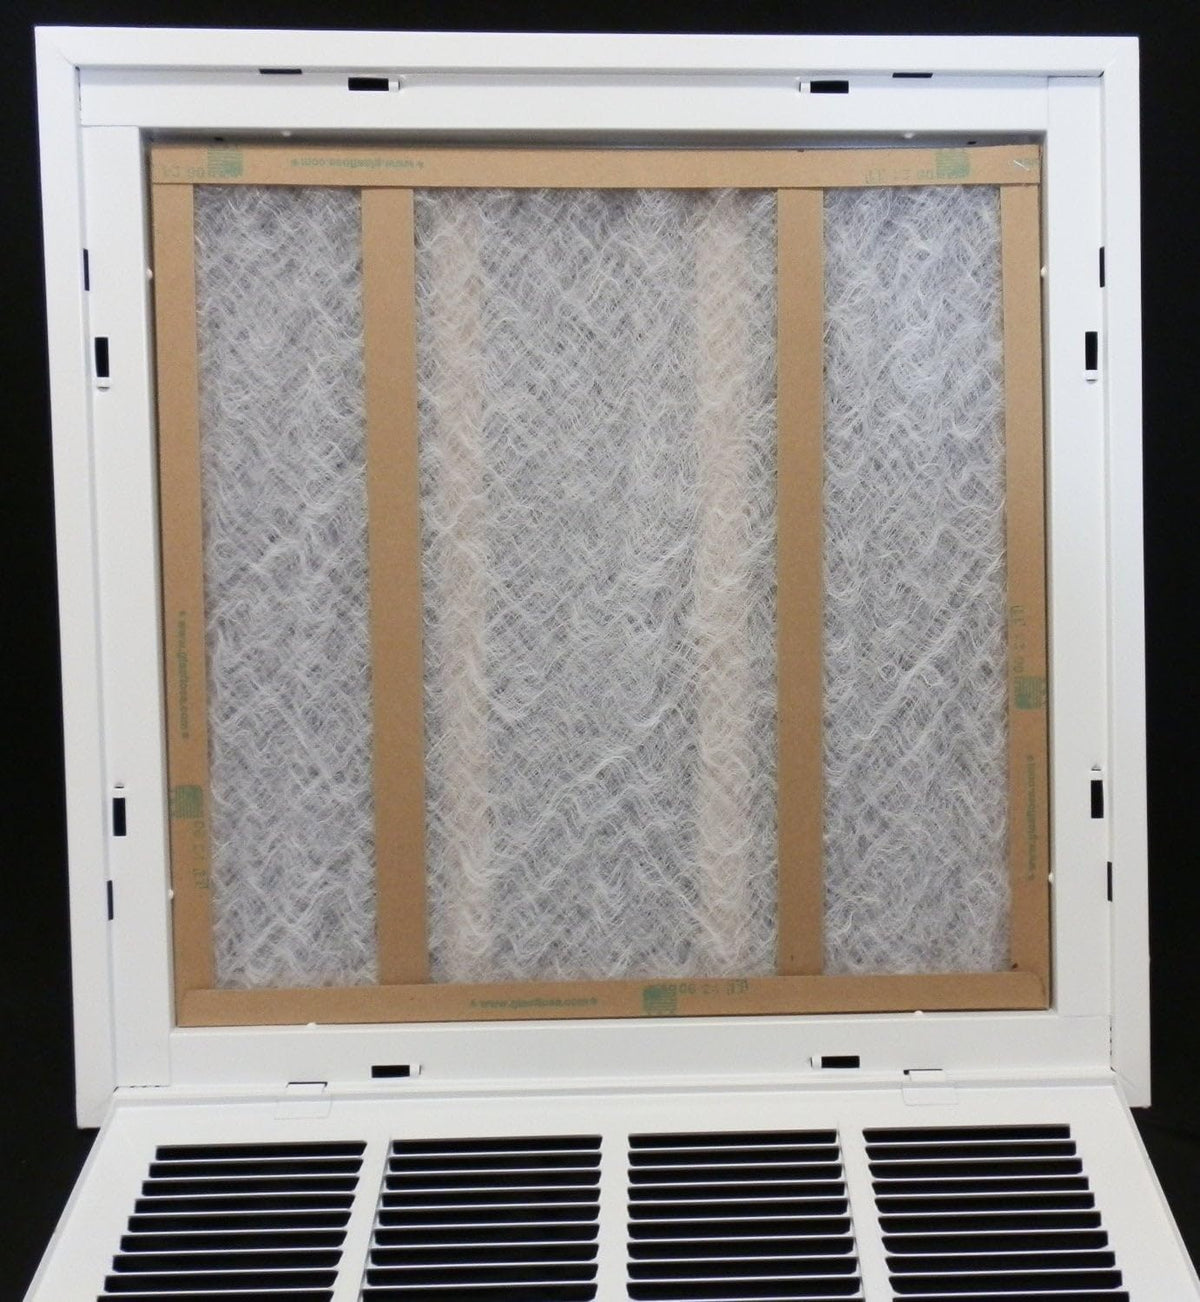 8&quot; X 34&quot; Steel Return Air Filter Grille for 1&quot; Filter - Removable Frame - [Outer Dimensions: 10 5/8&quot; X 36 5/8&quot;]